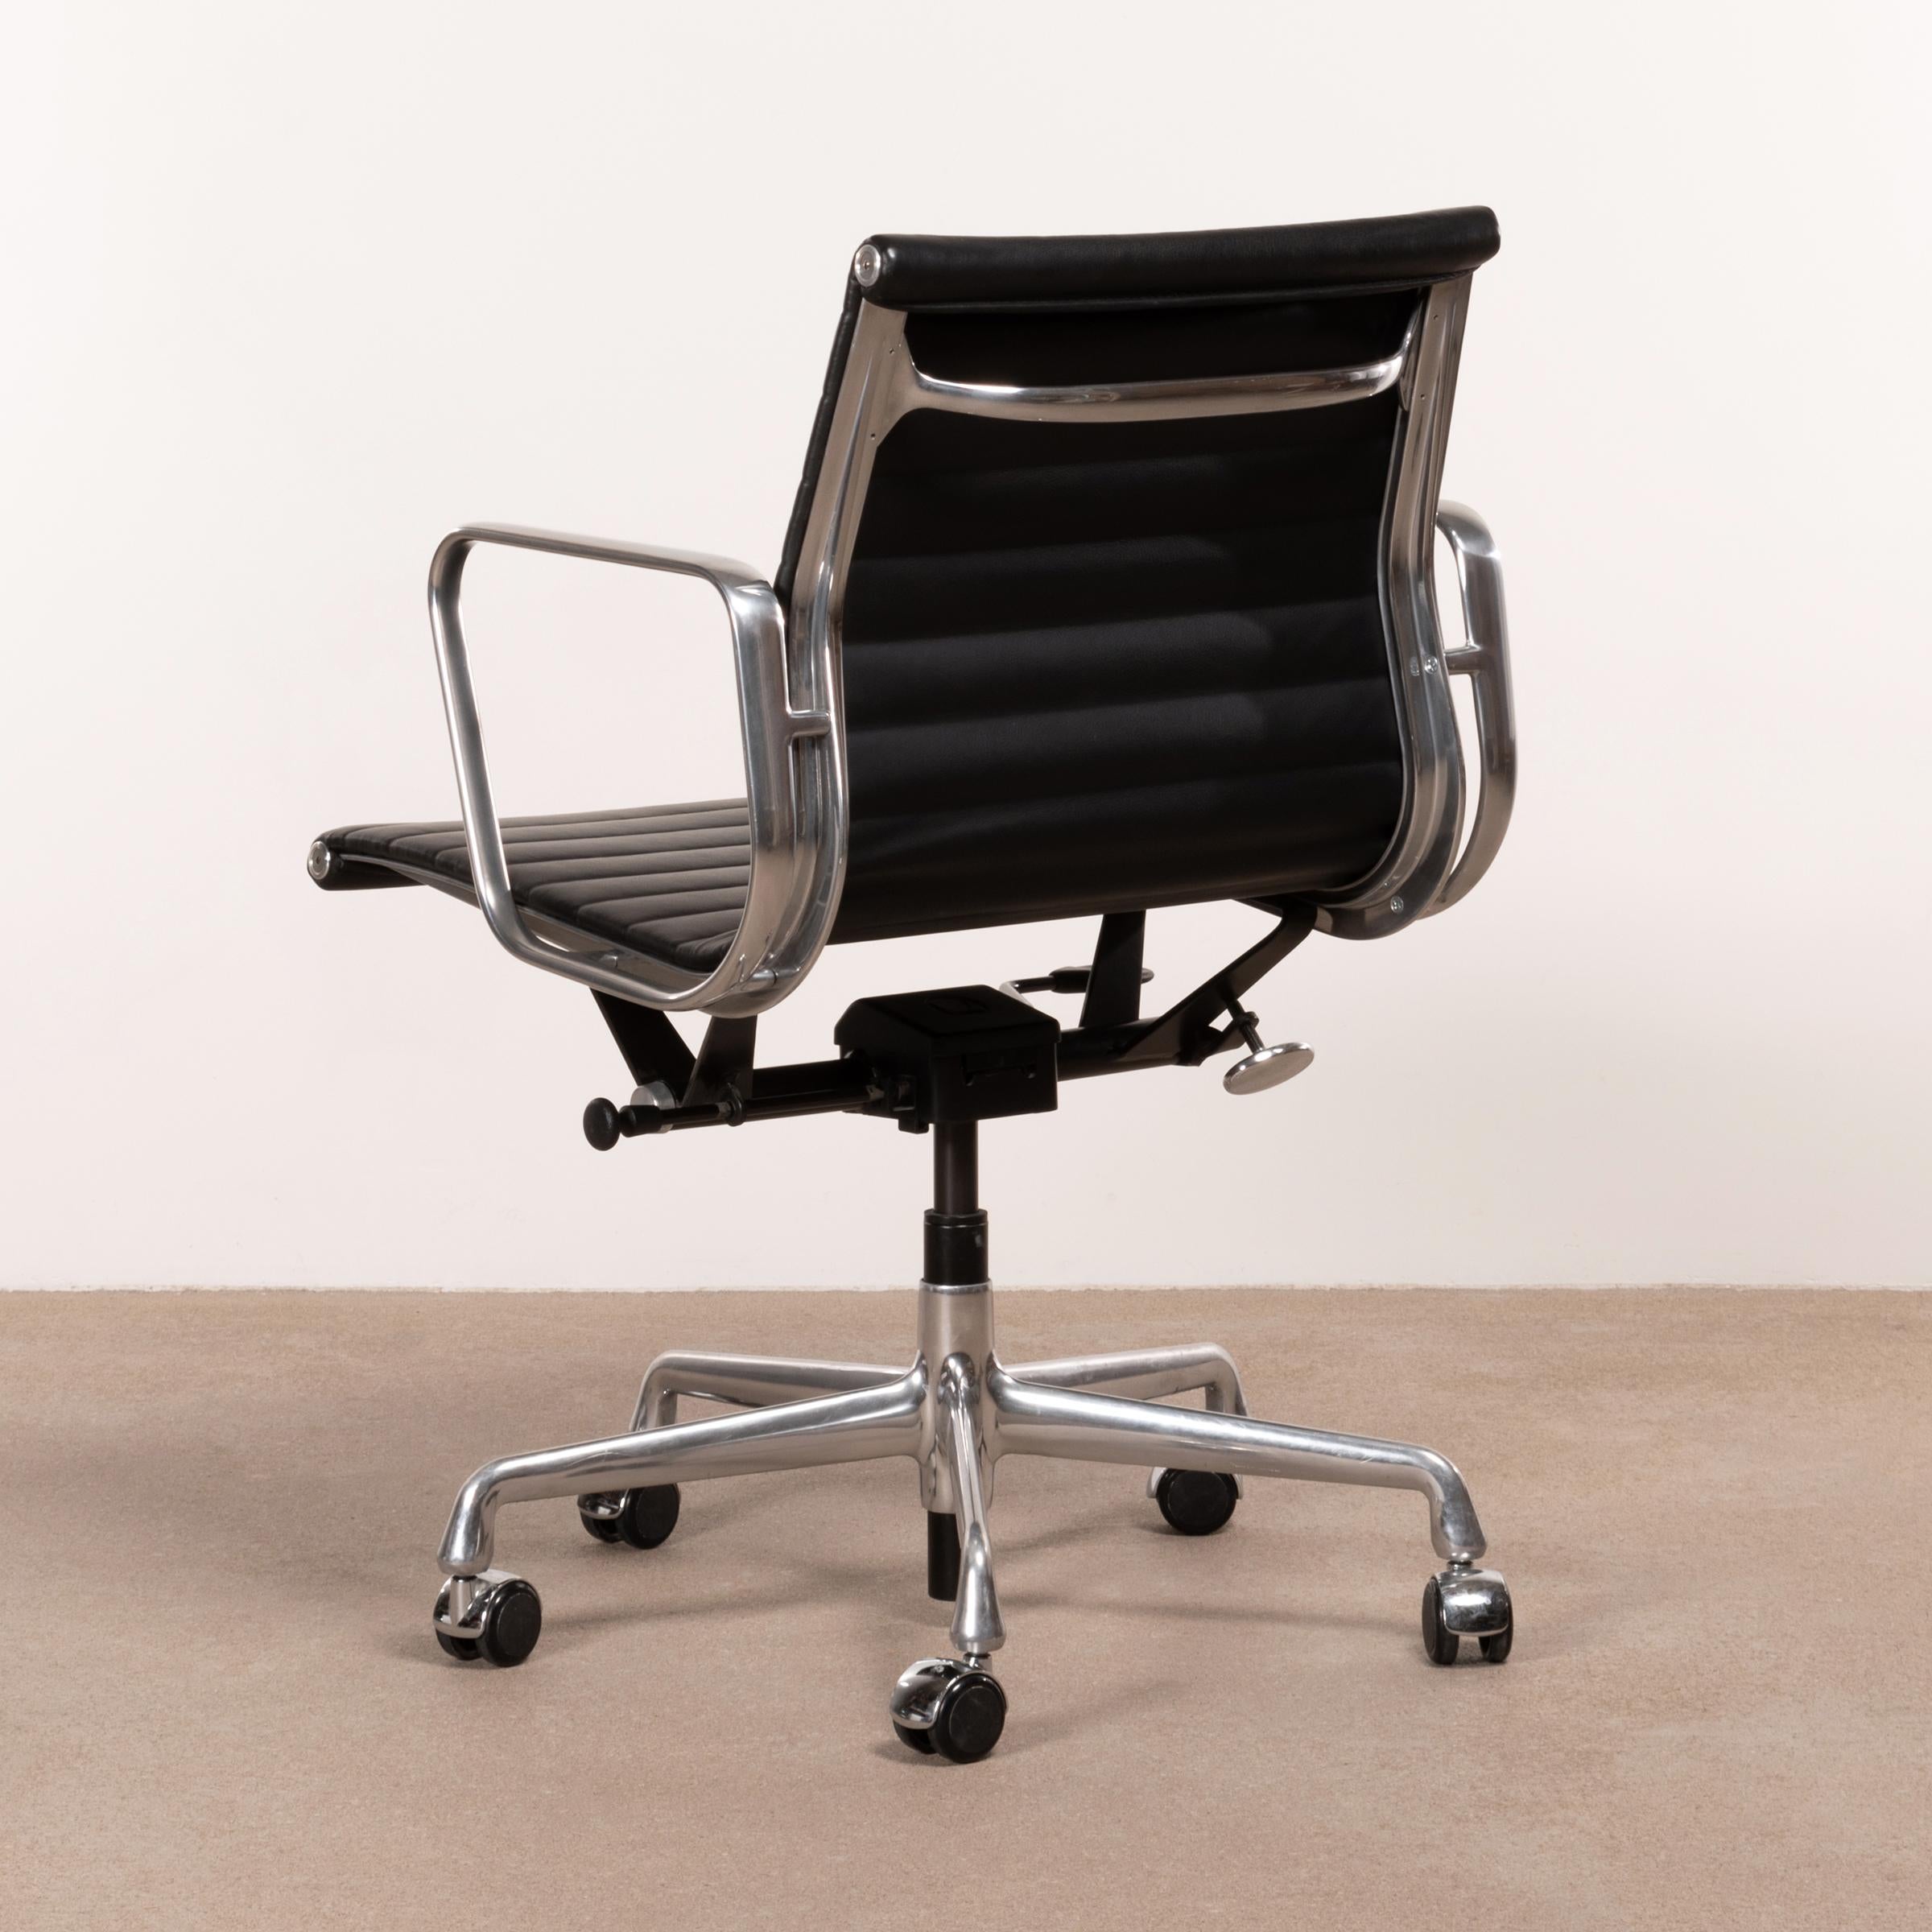 Mid-20th Century Eames Management Office Chair in Black Leather for Herman Miller